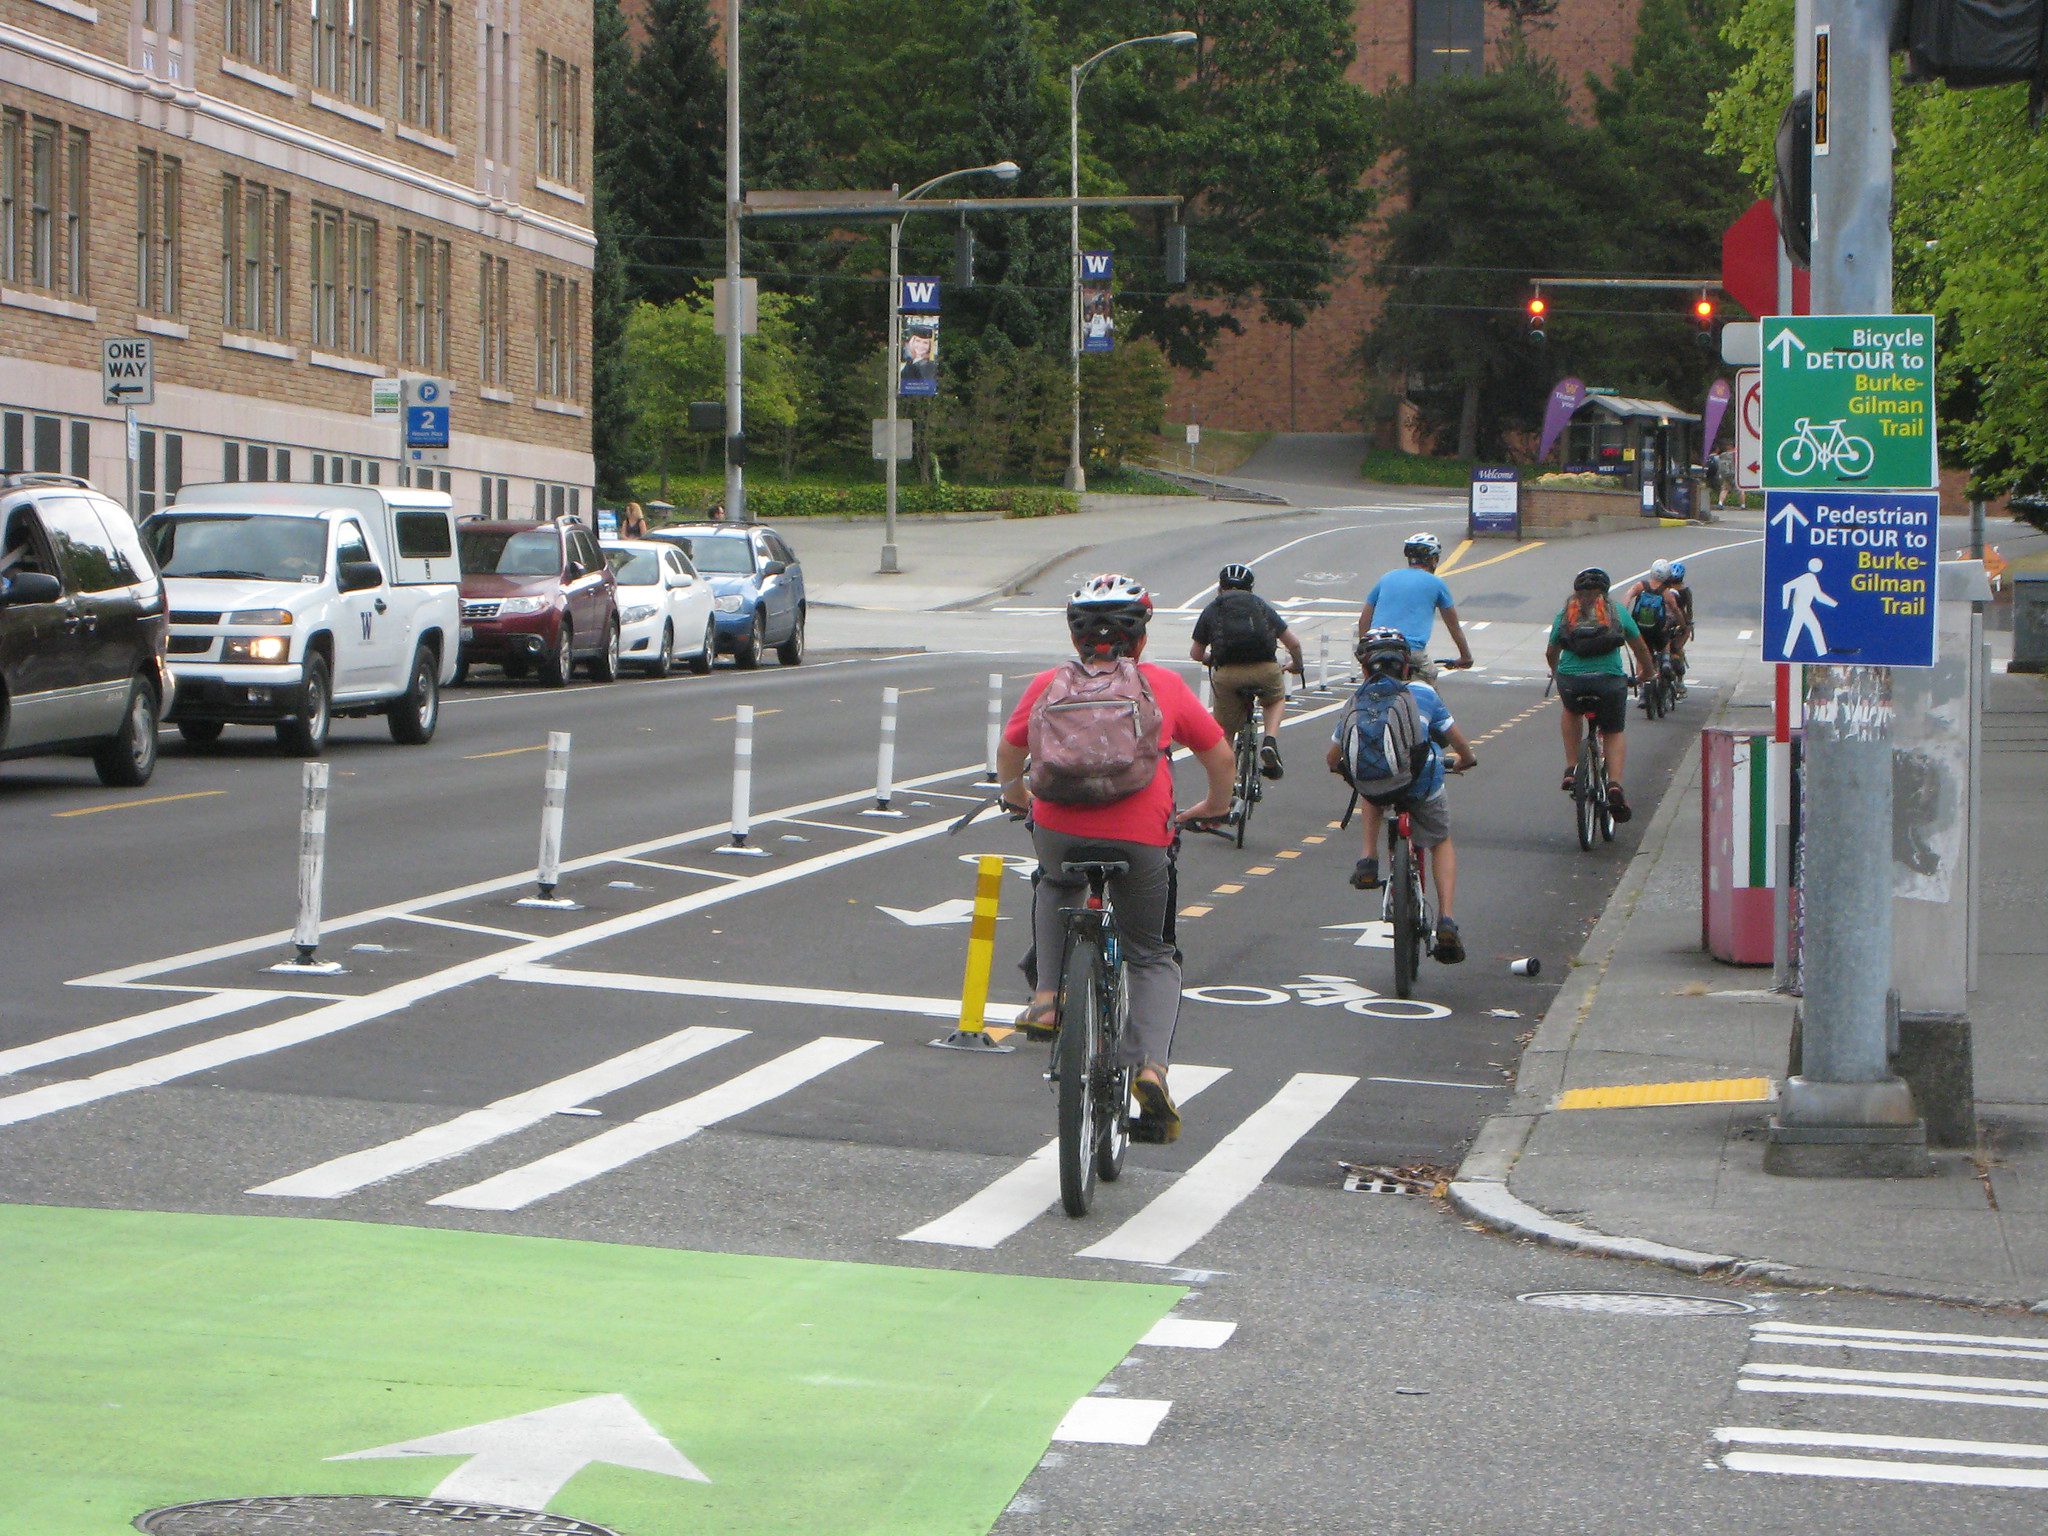 Several people including young people bike along a protected bike lane. Large buildings and parked cars are in the background, as well as utility poles and signs.